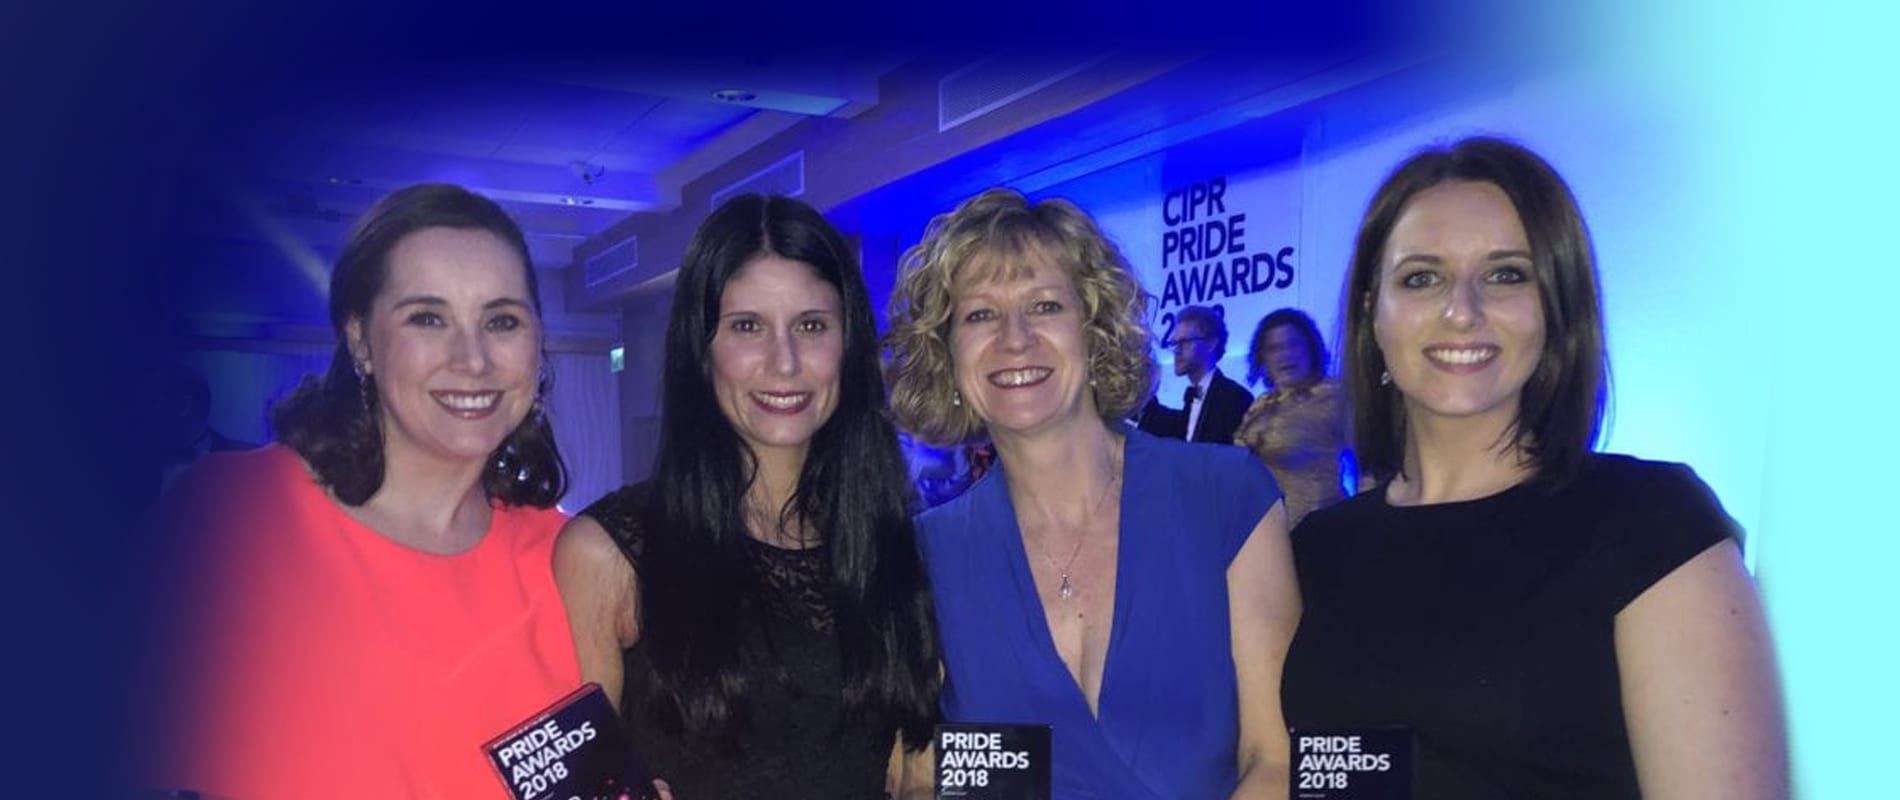 Lorna, Hayley, Karen and Hannah with the awards from the CIPR Pride Awards